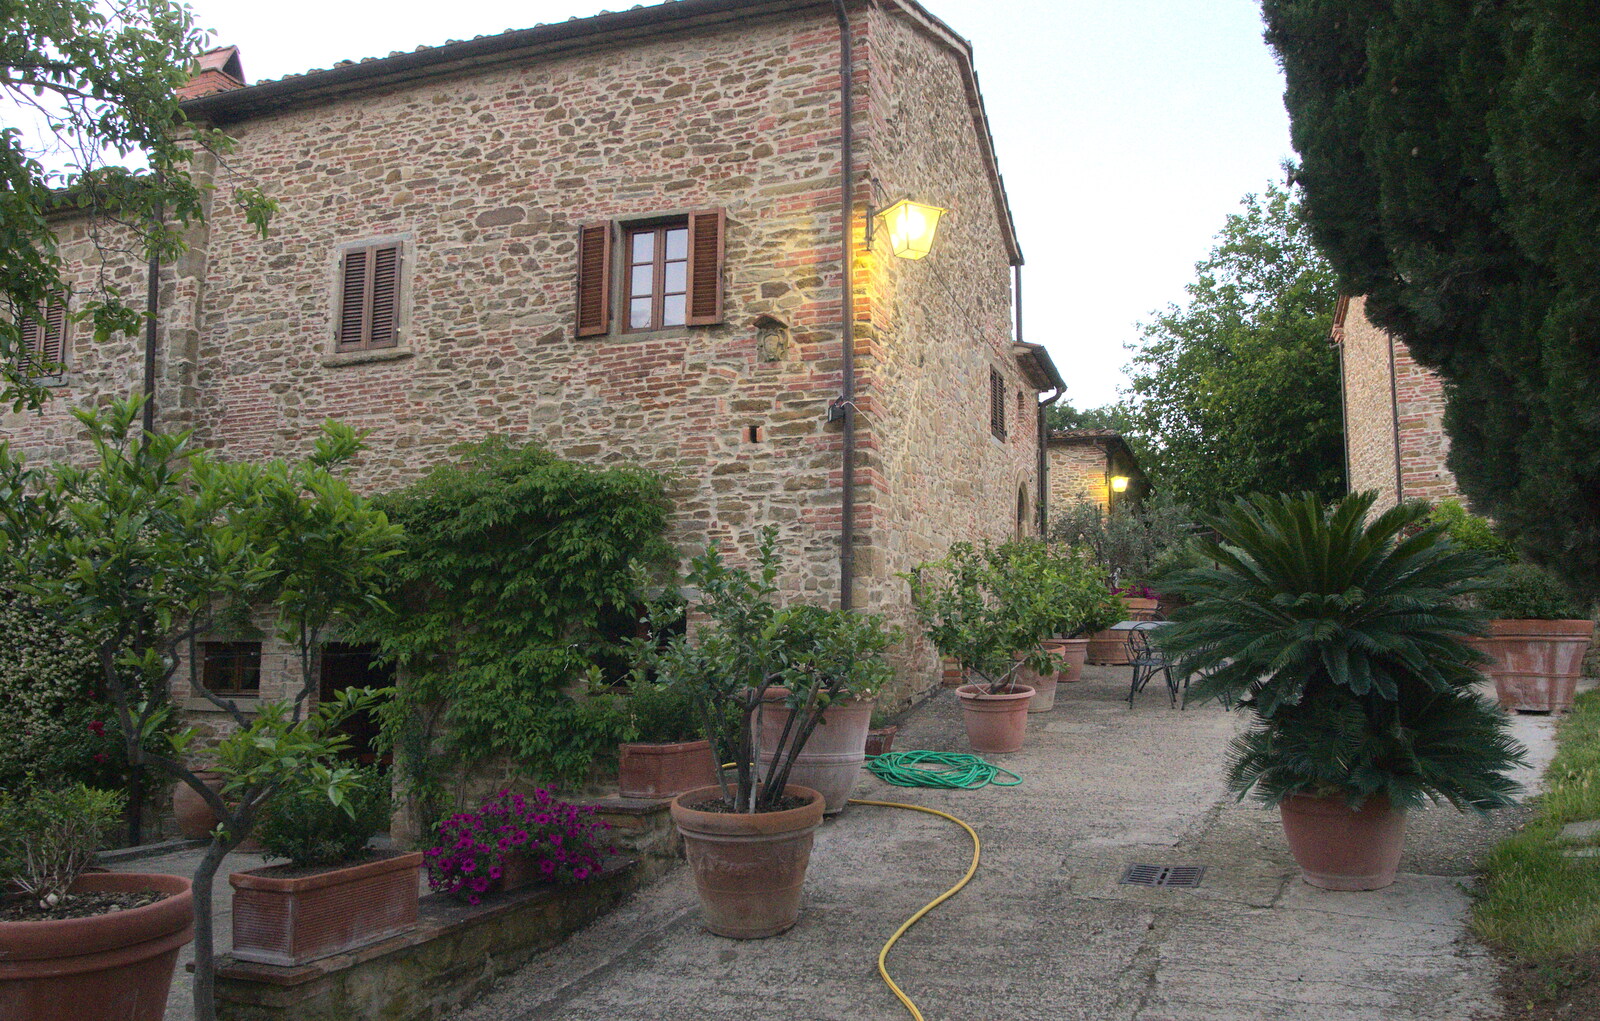 The path up to our apartment from La Verna Monastery and the Fireflies of Tuscany, Italy - 14th June 2013